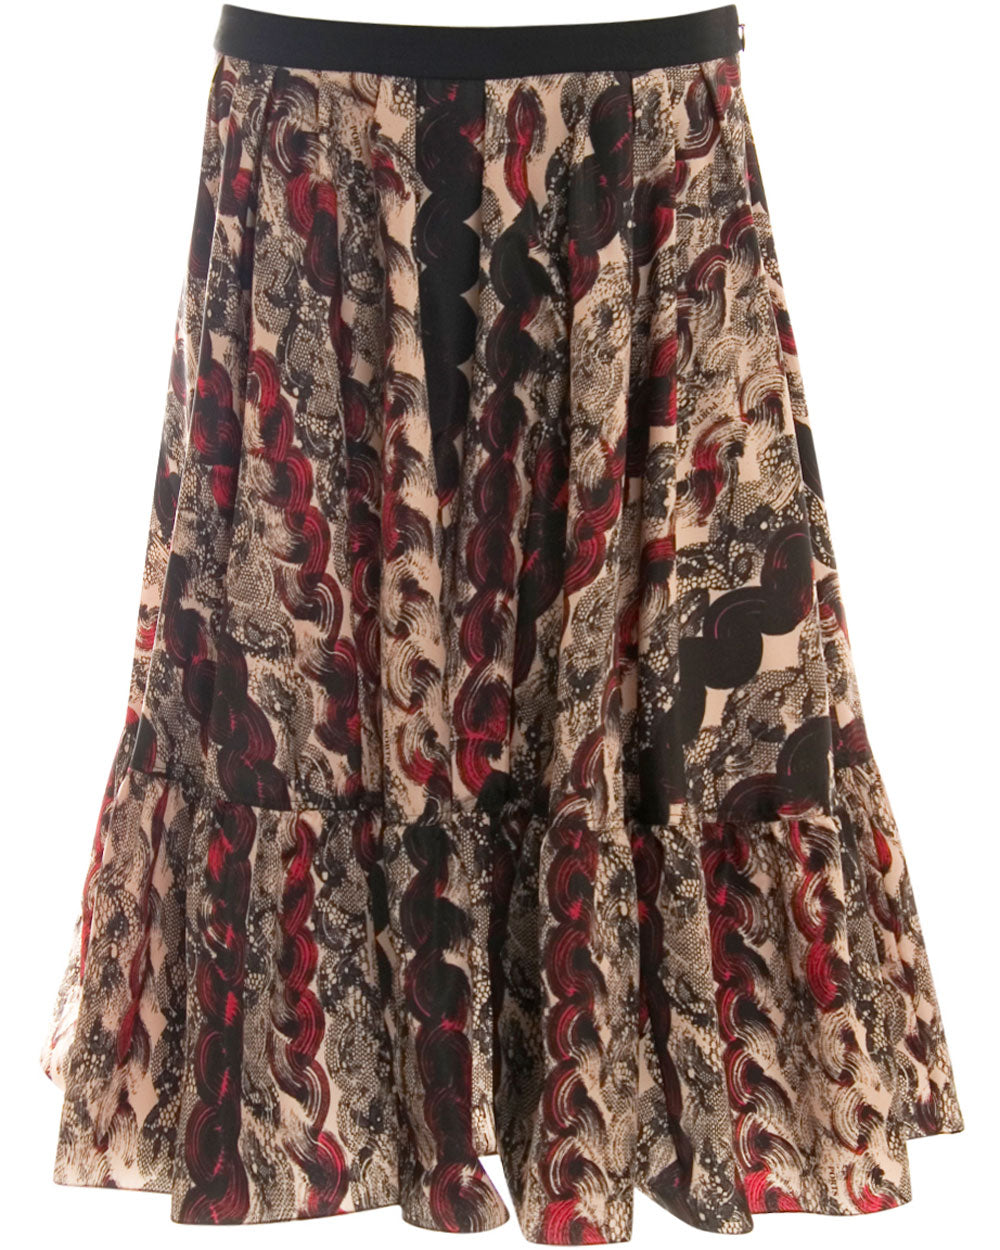 Black and Red Printed Skirt